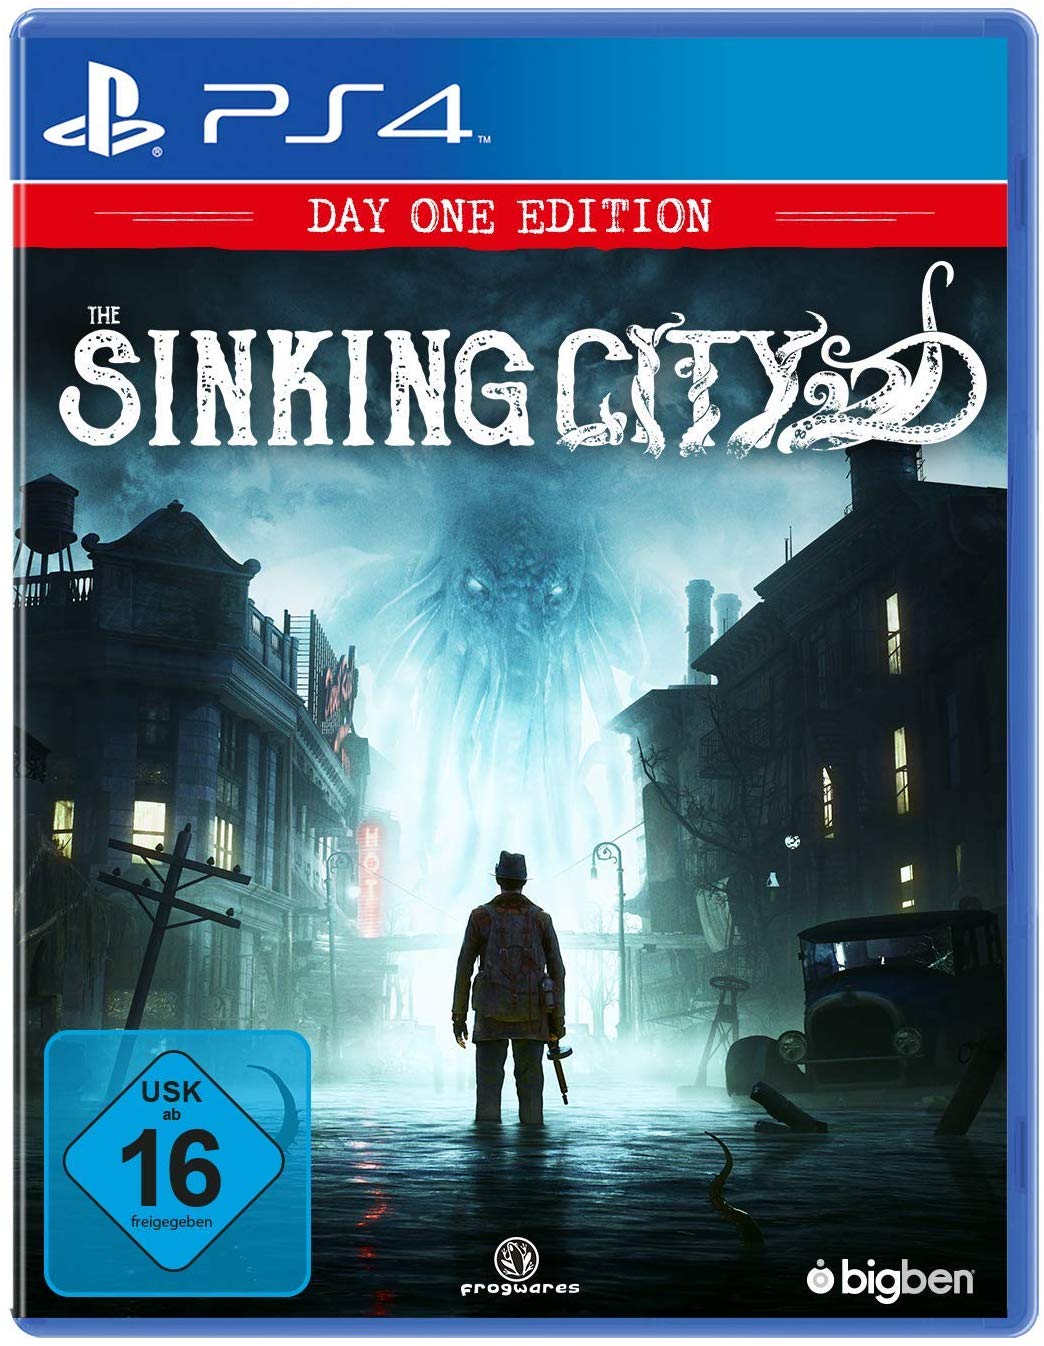 the sinking city necronomicon edition review